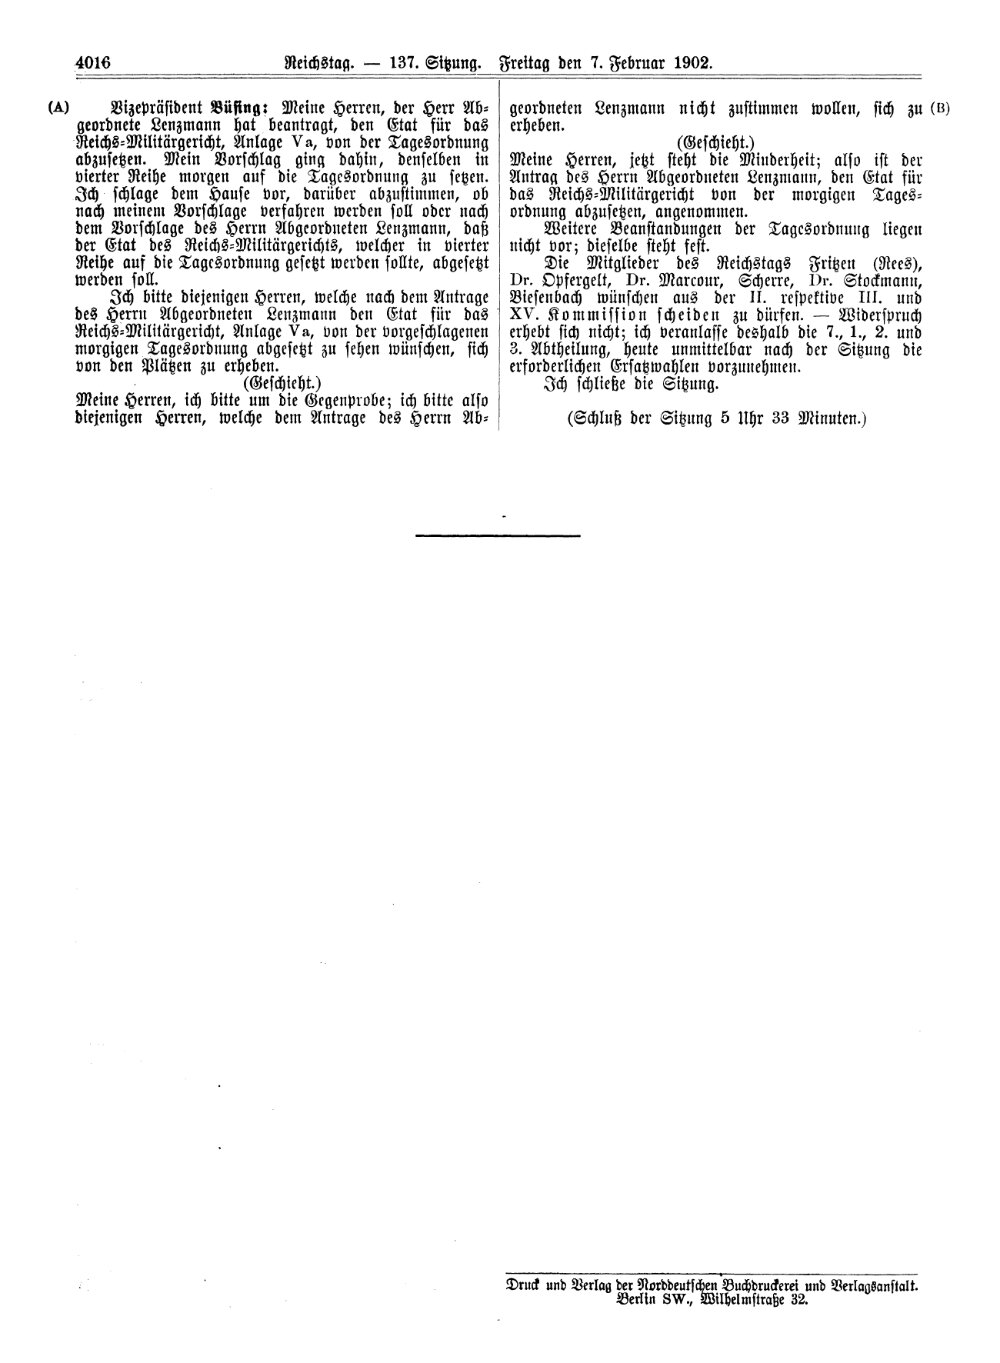 Scan of page 4016